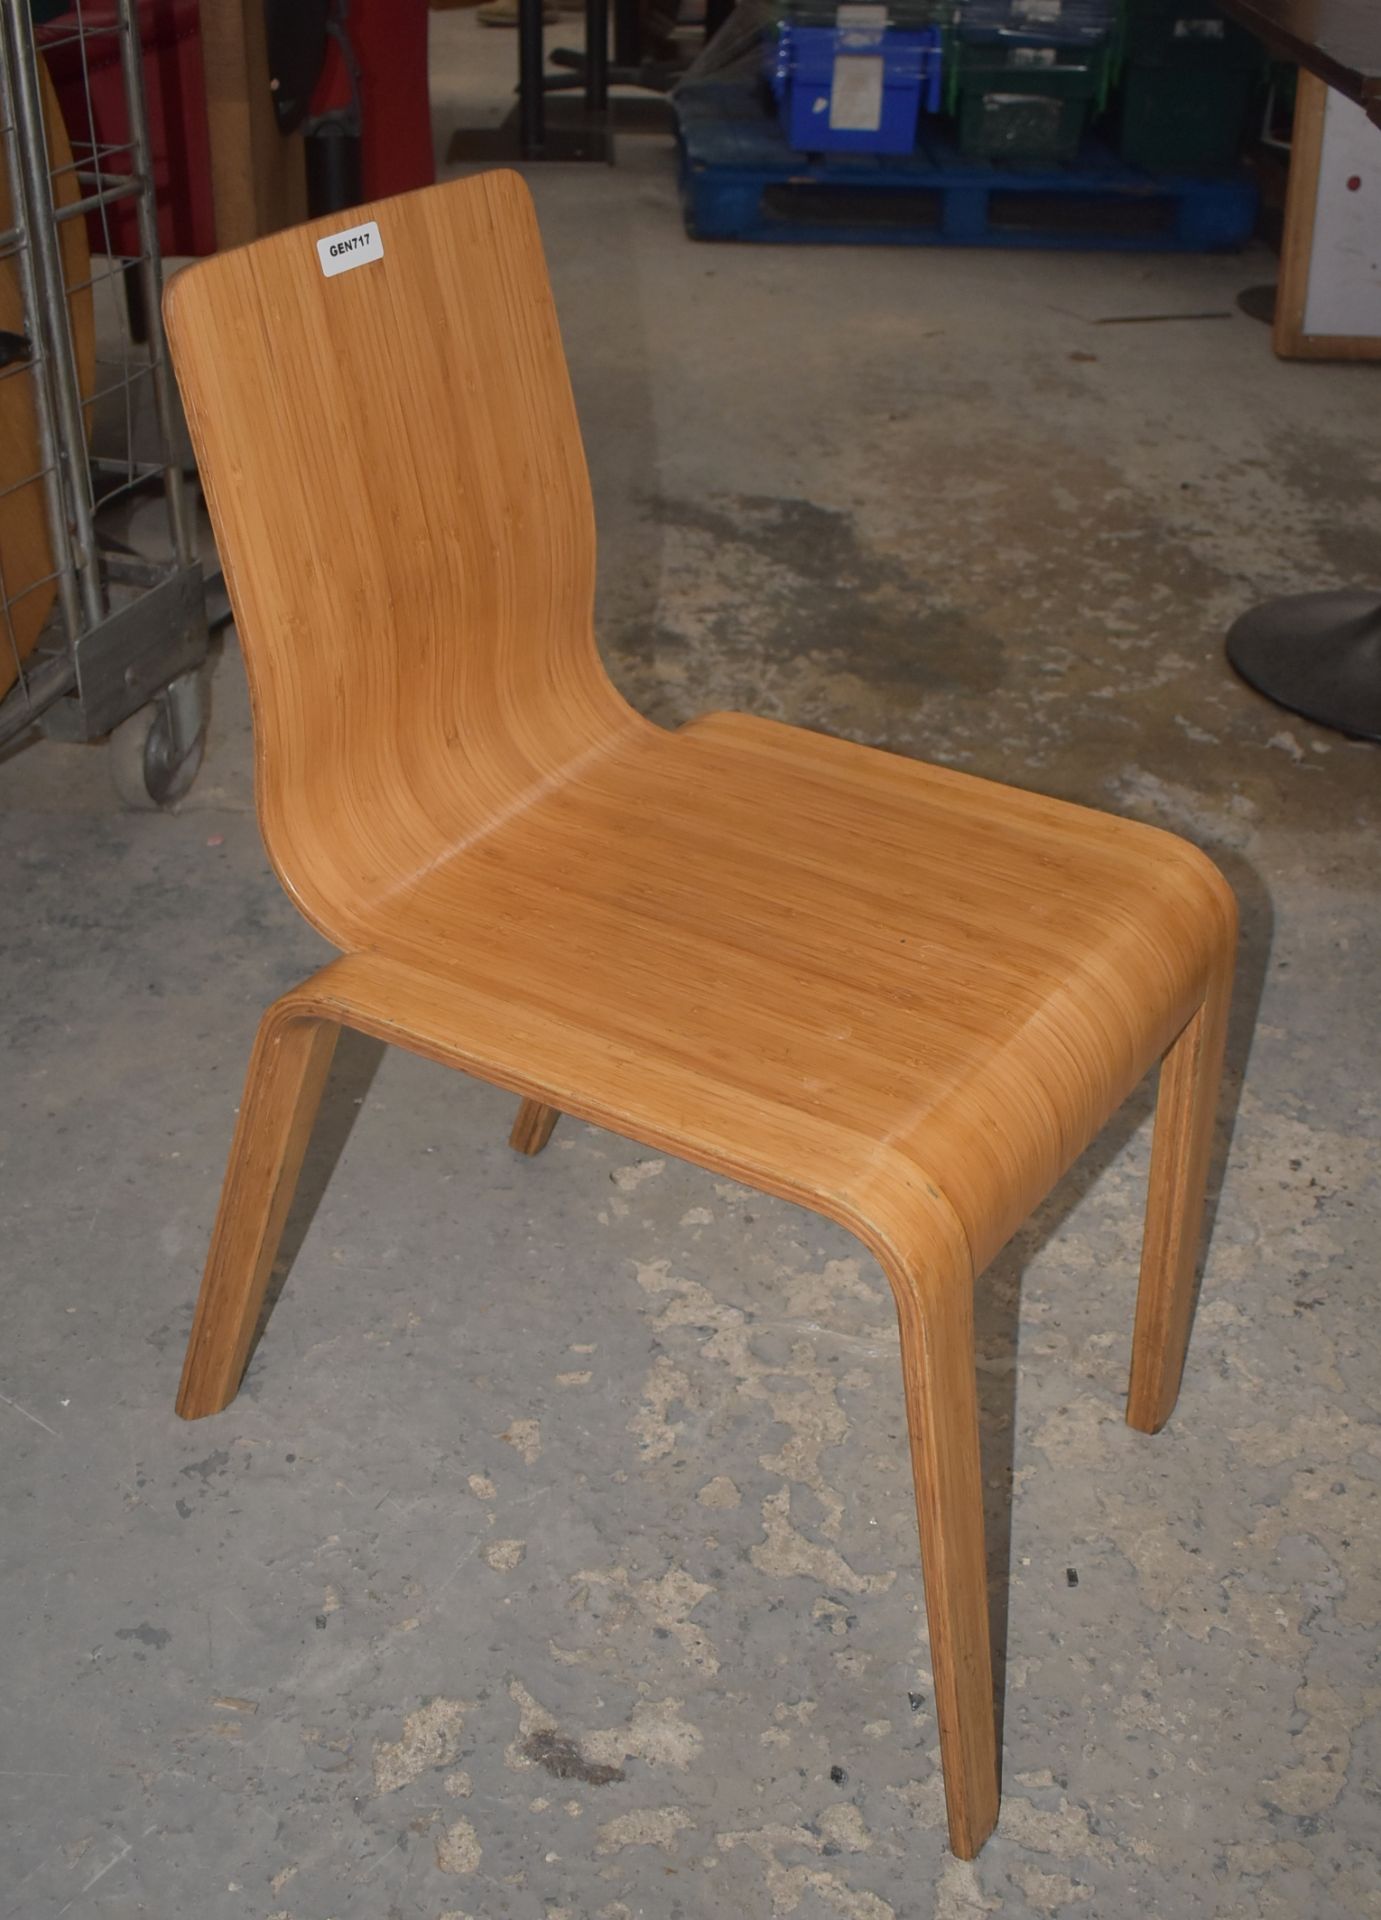 1 x Stylish Wooden Chair With A Curved Design - Dimensions: H80 x W42 x D58cm / Seat 44cm - Ref: - Image 5 of 7